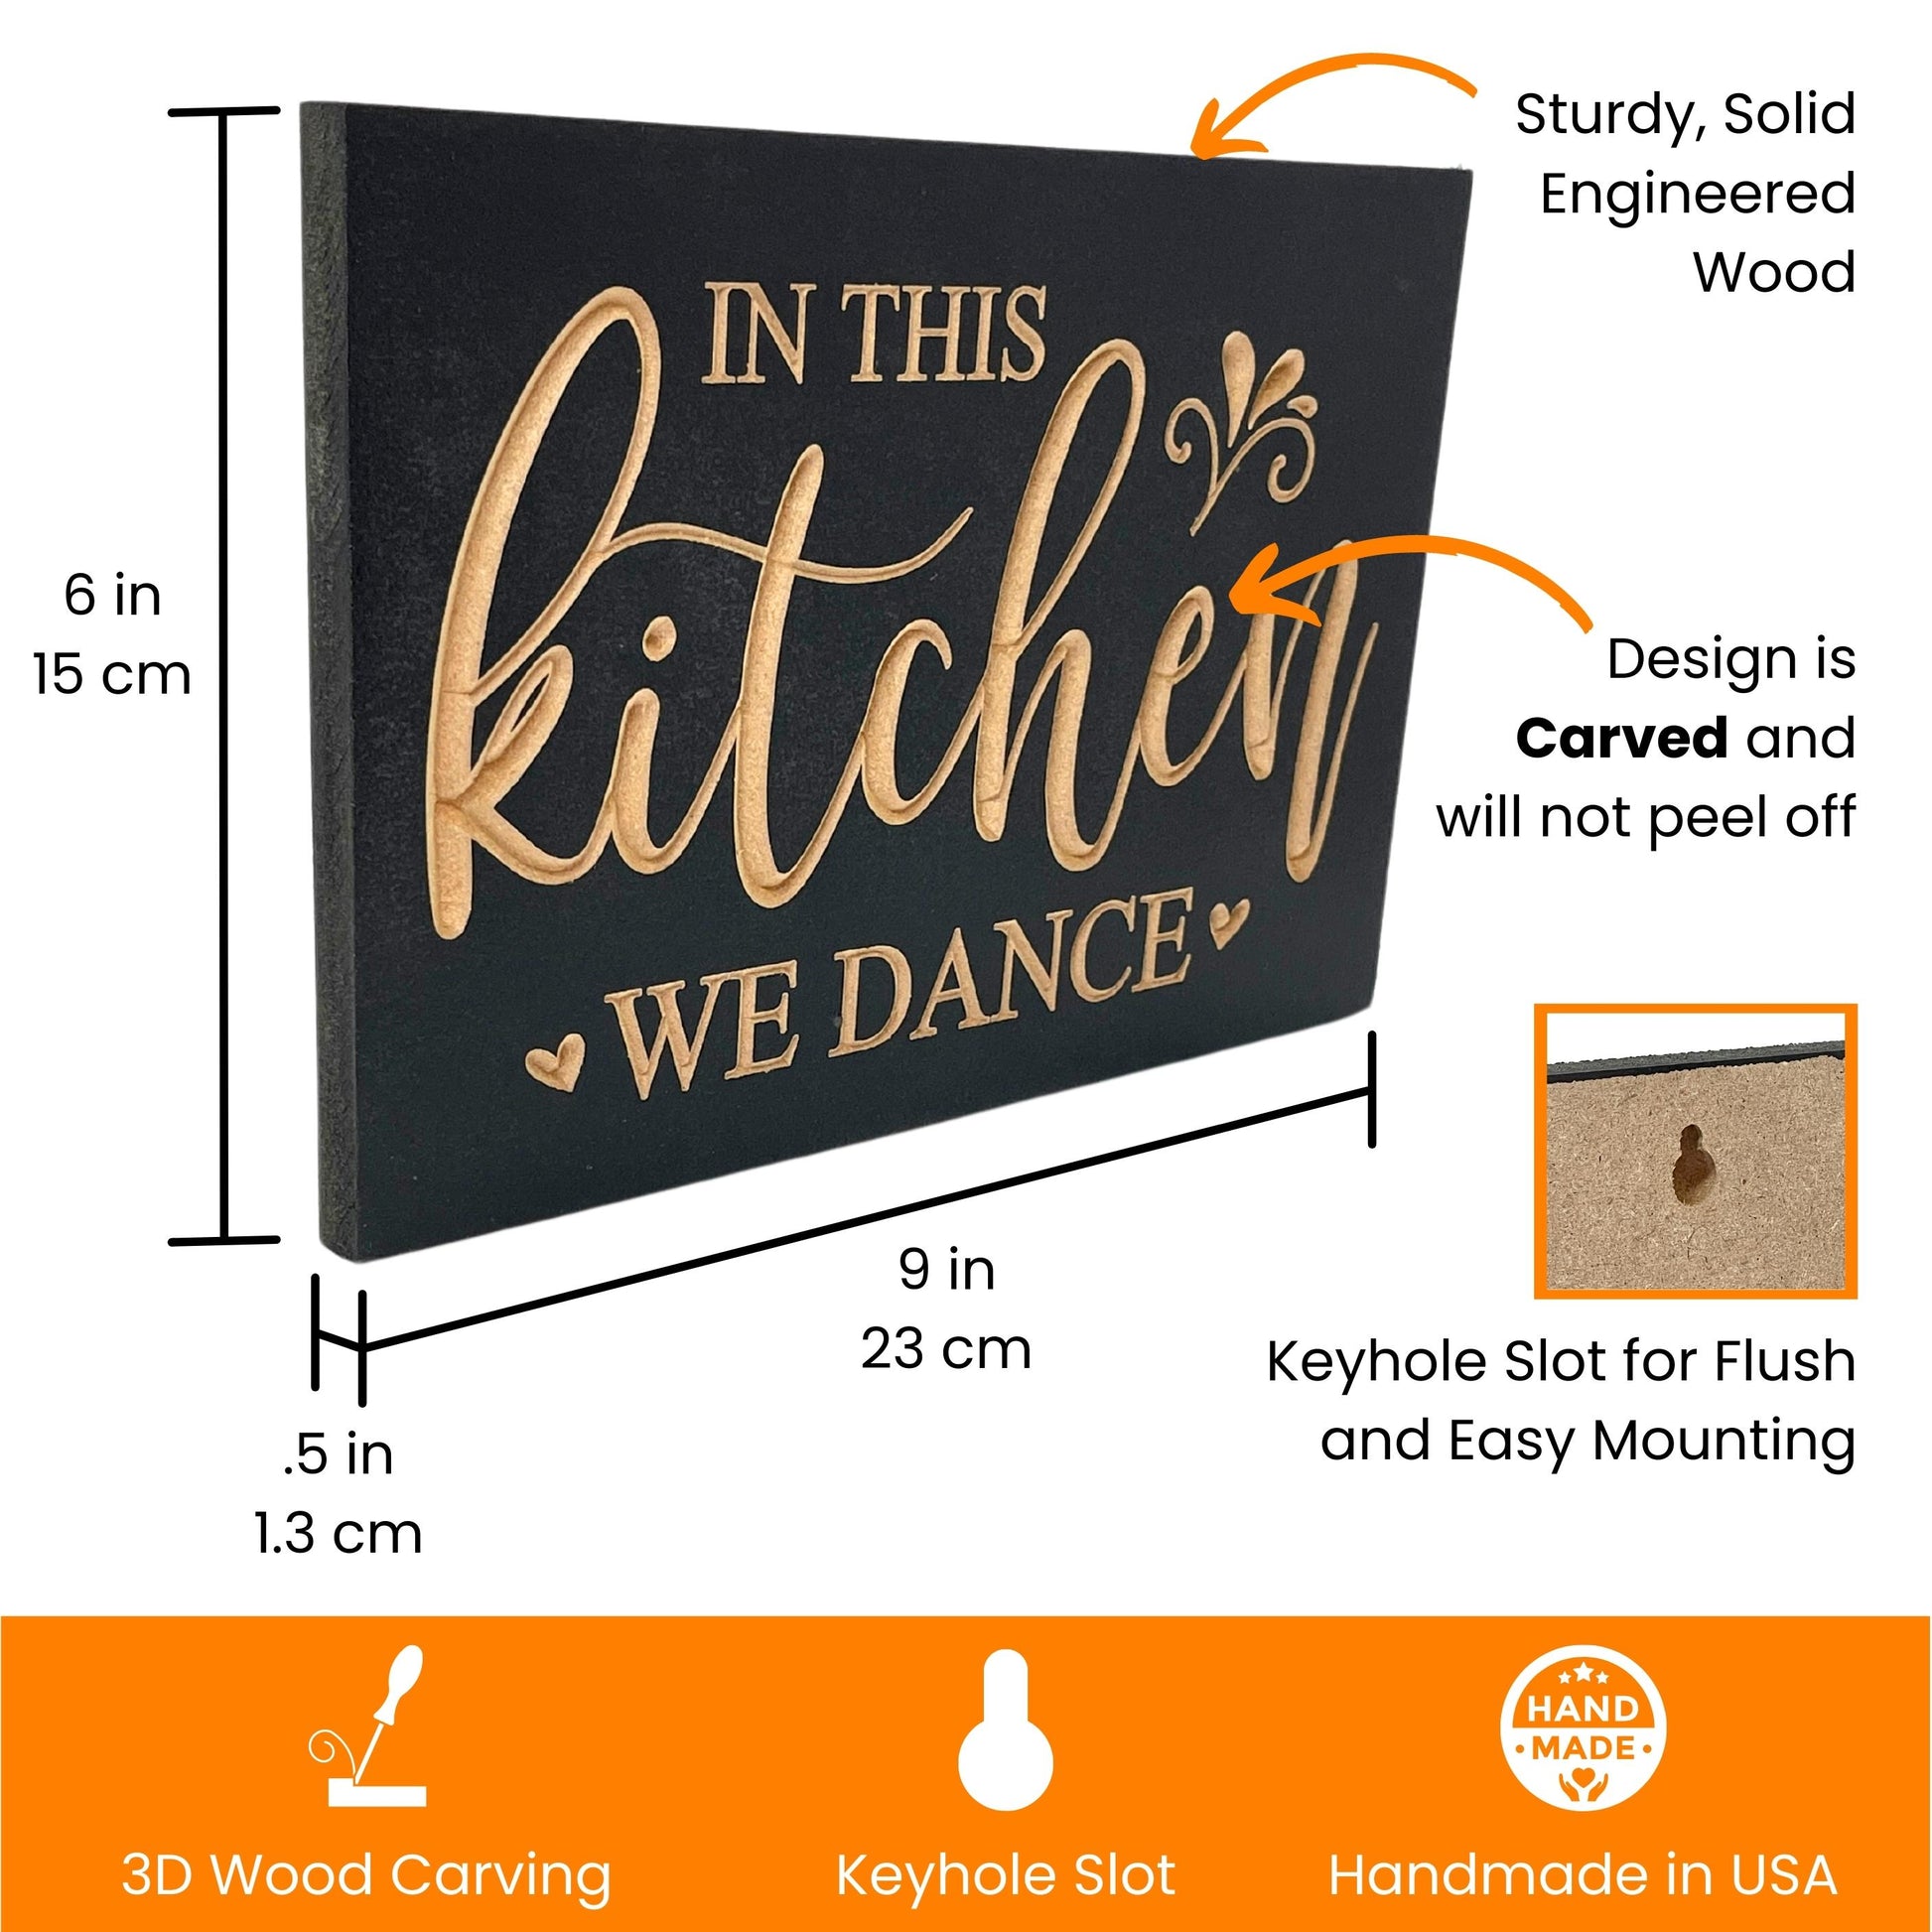 In This Kitchen We Dance Product Details